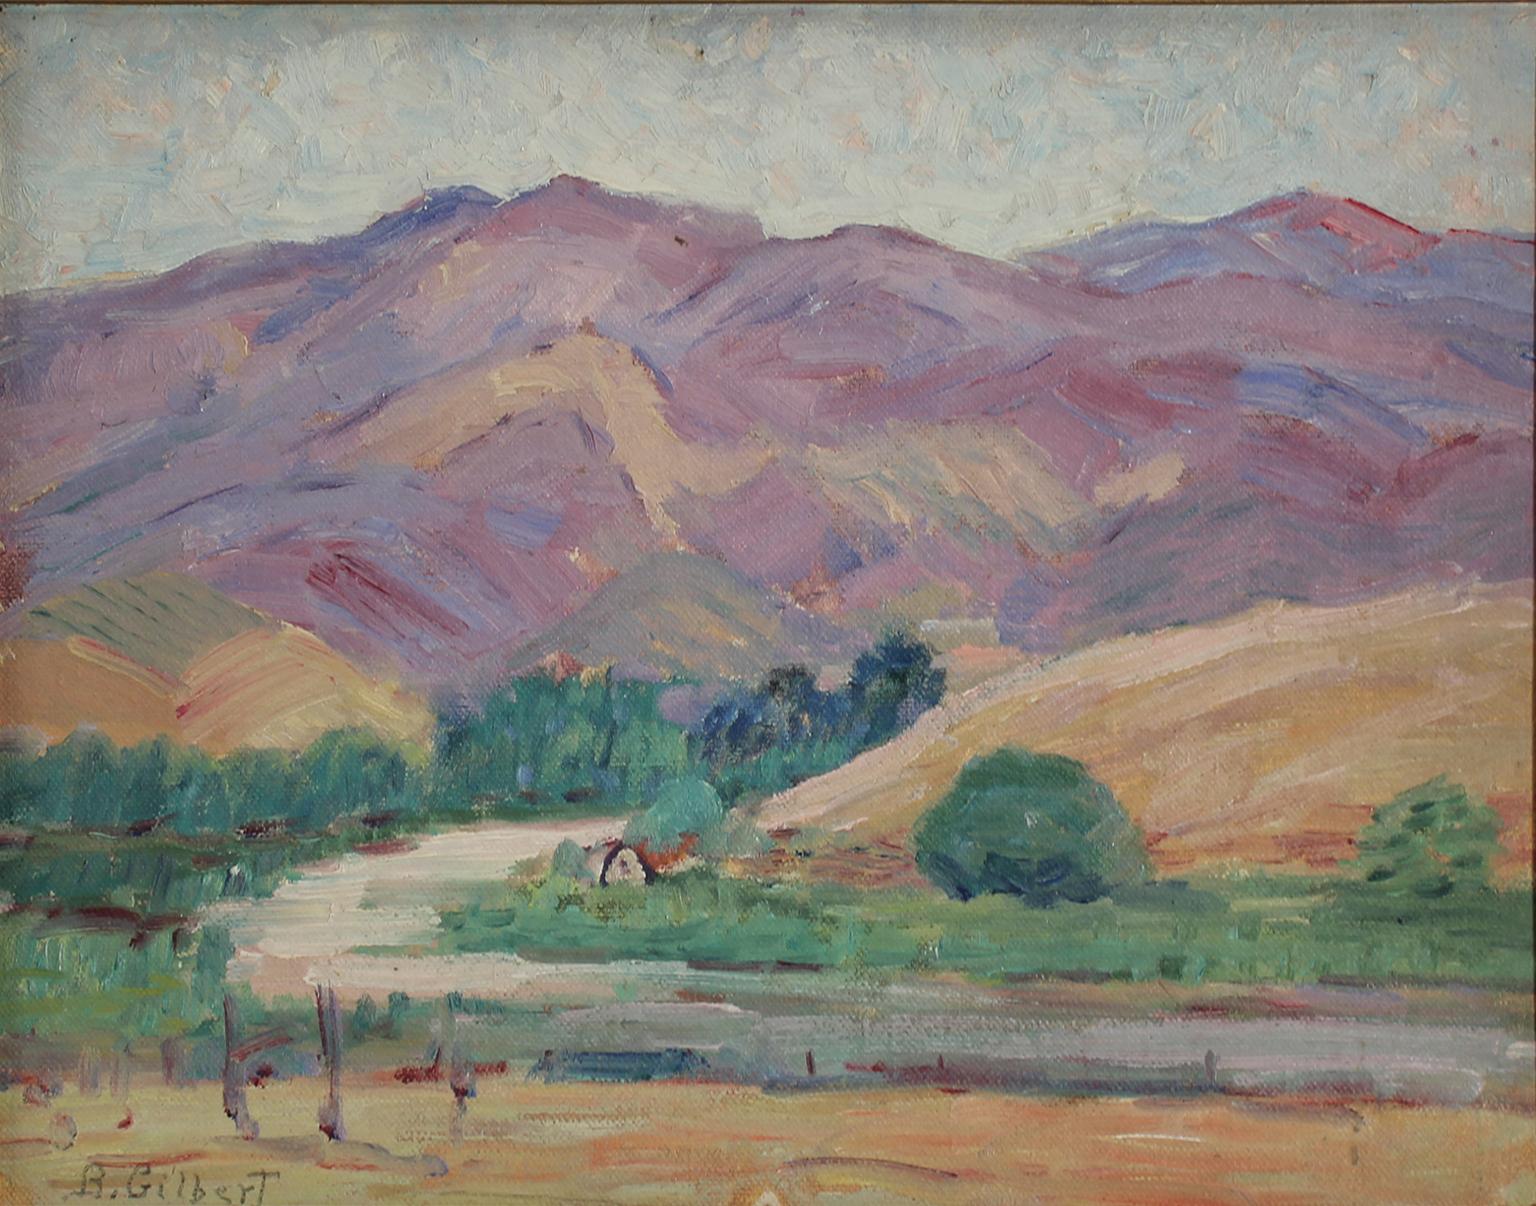 Beautiful plein air painting by listed San Diego impressionist artist Bess Gilbert. Dates from the 1930s and is of a mountain range in the back County of San Diego. Very extensive bio online about the artist and her rich San Diego history. In the